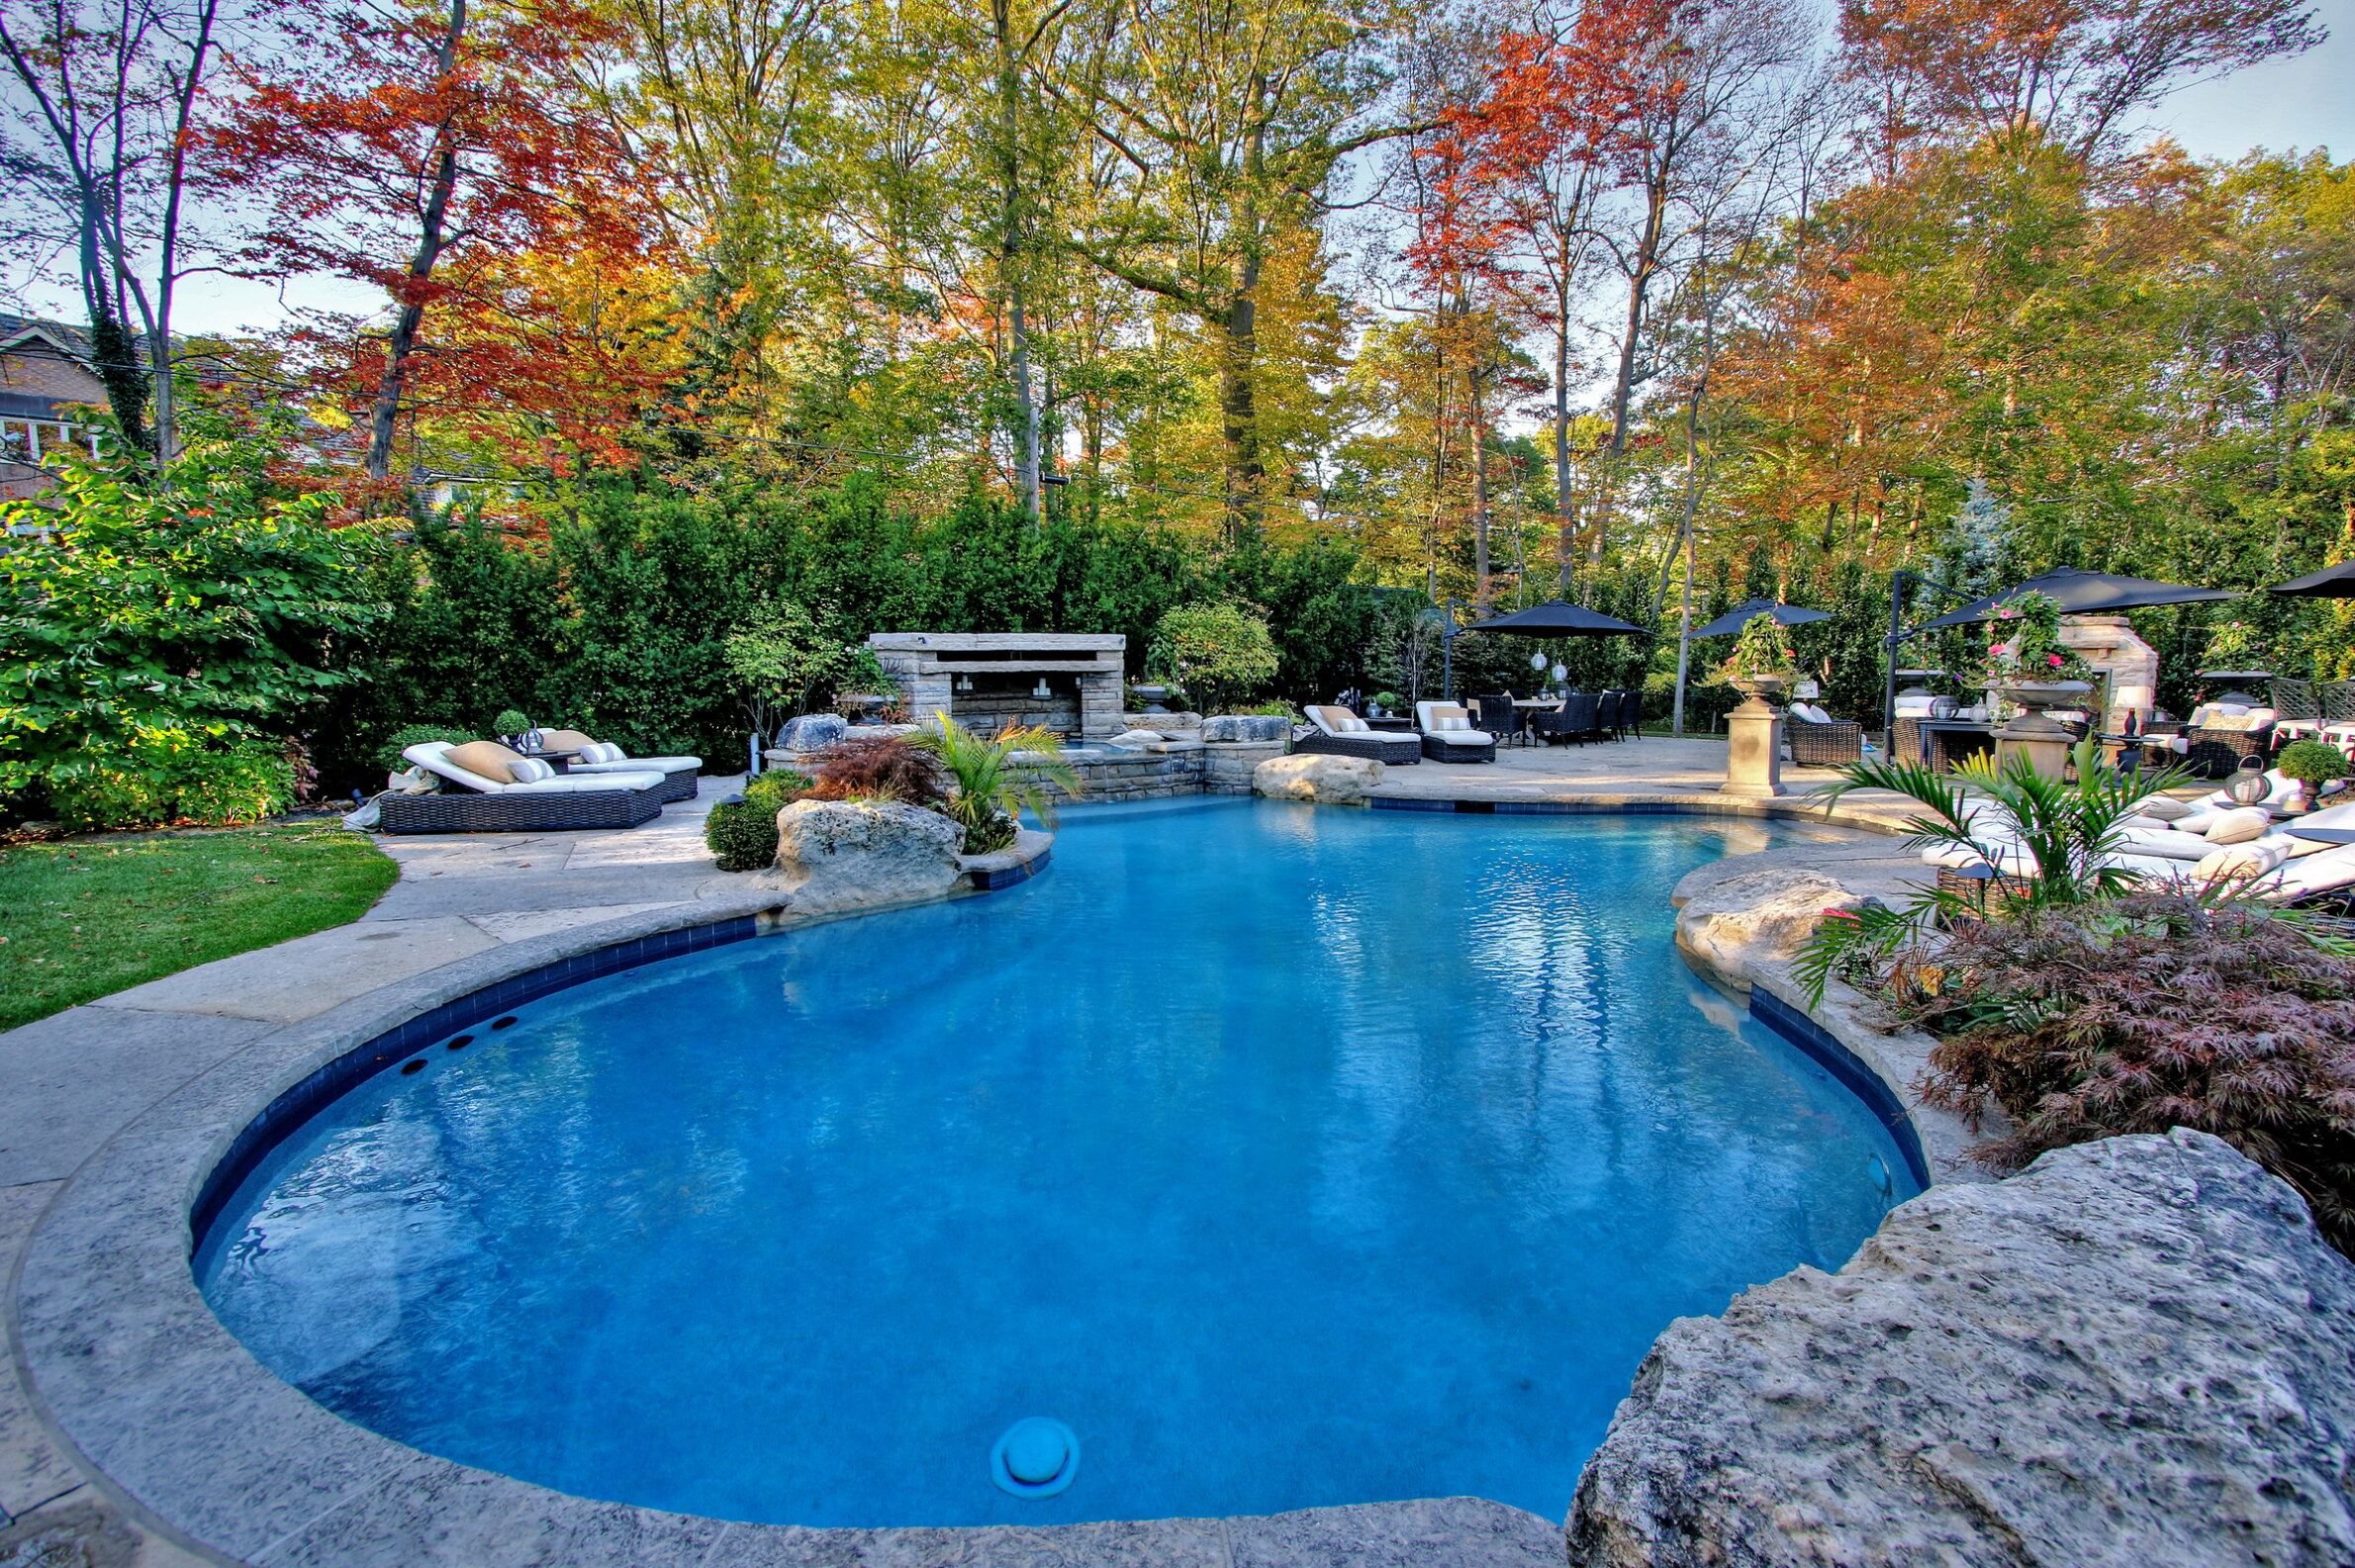 An inviting backyard with a curvy swimming pool, surrounded by autumn-colored trees, patio furniture, outdoor fireplace, and lush greenery under clear skies.